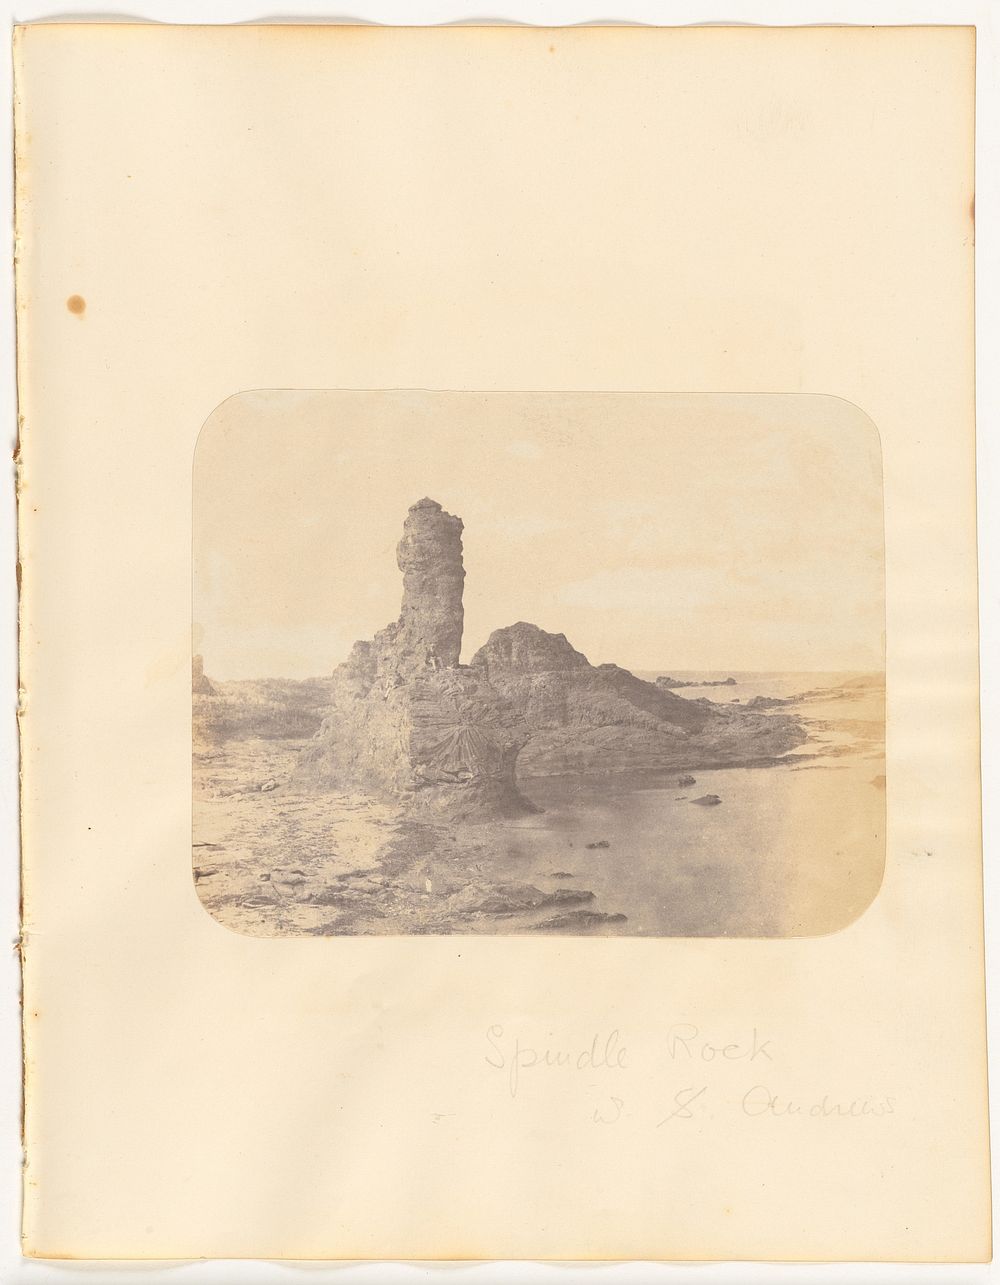 Spindle Rock, W. St. Andrews by Thomas Rodger